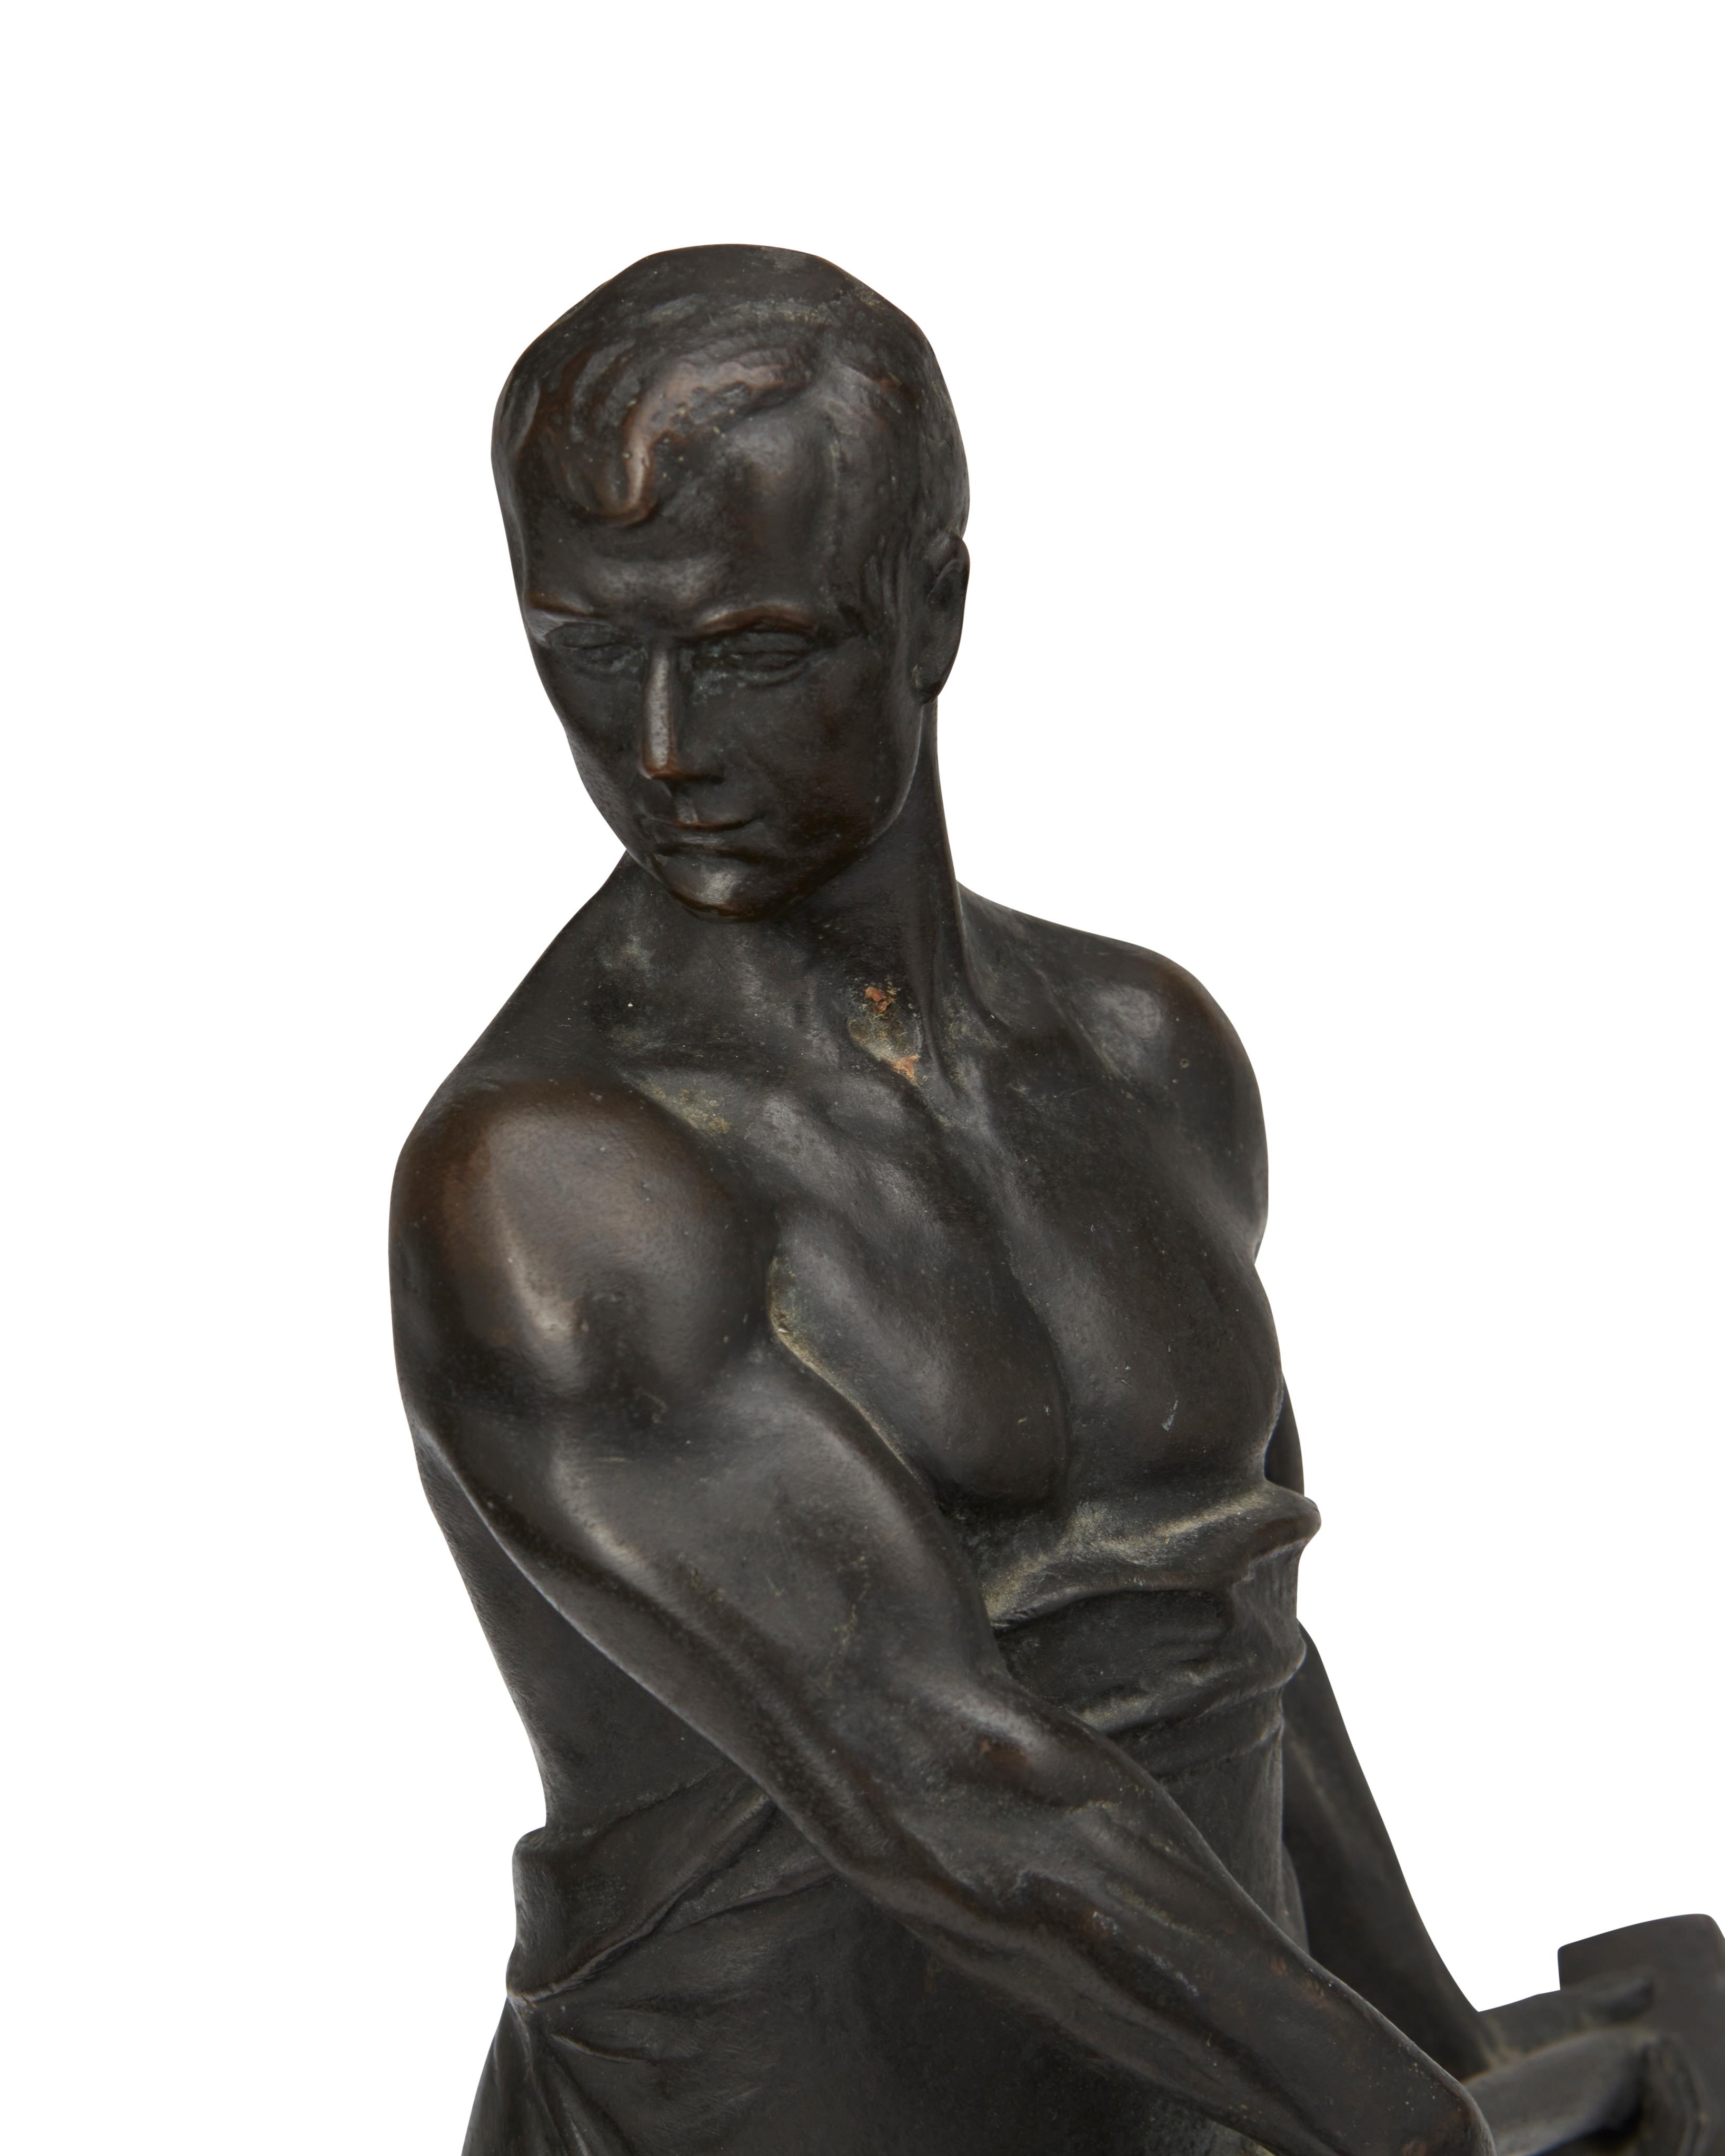 Artwork by Frans Iffland, "Stehender Schmied mit Hammer", Made of Patinated bronze with marble plinth